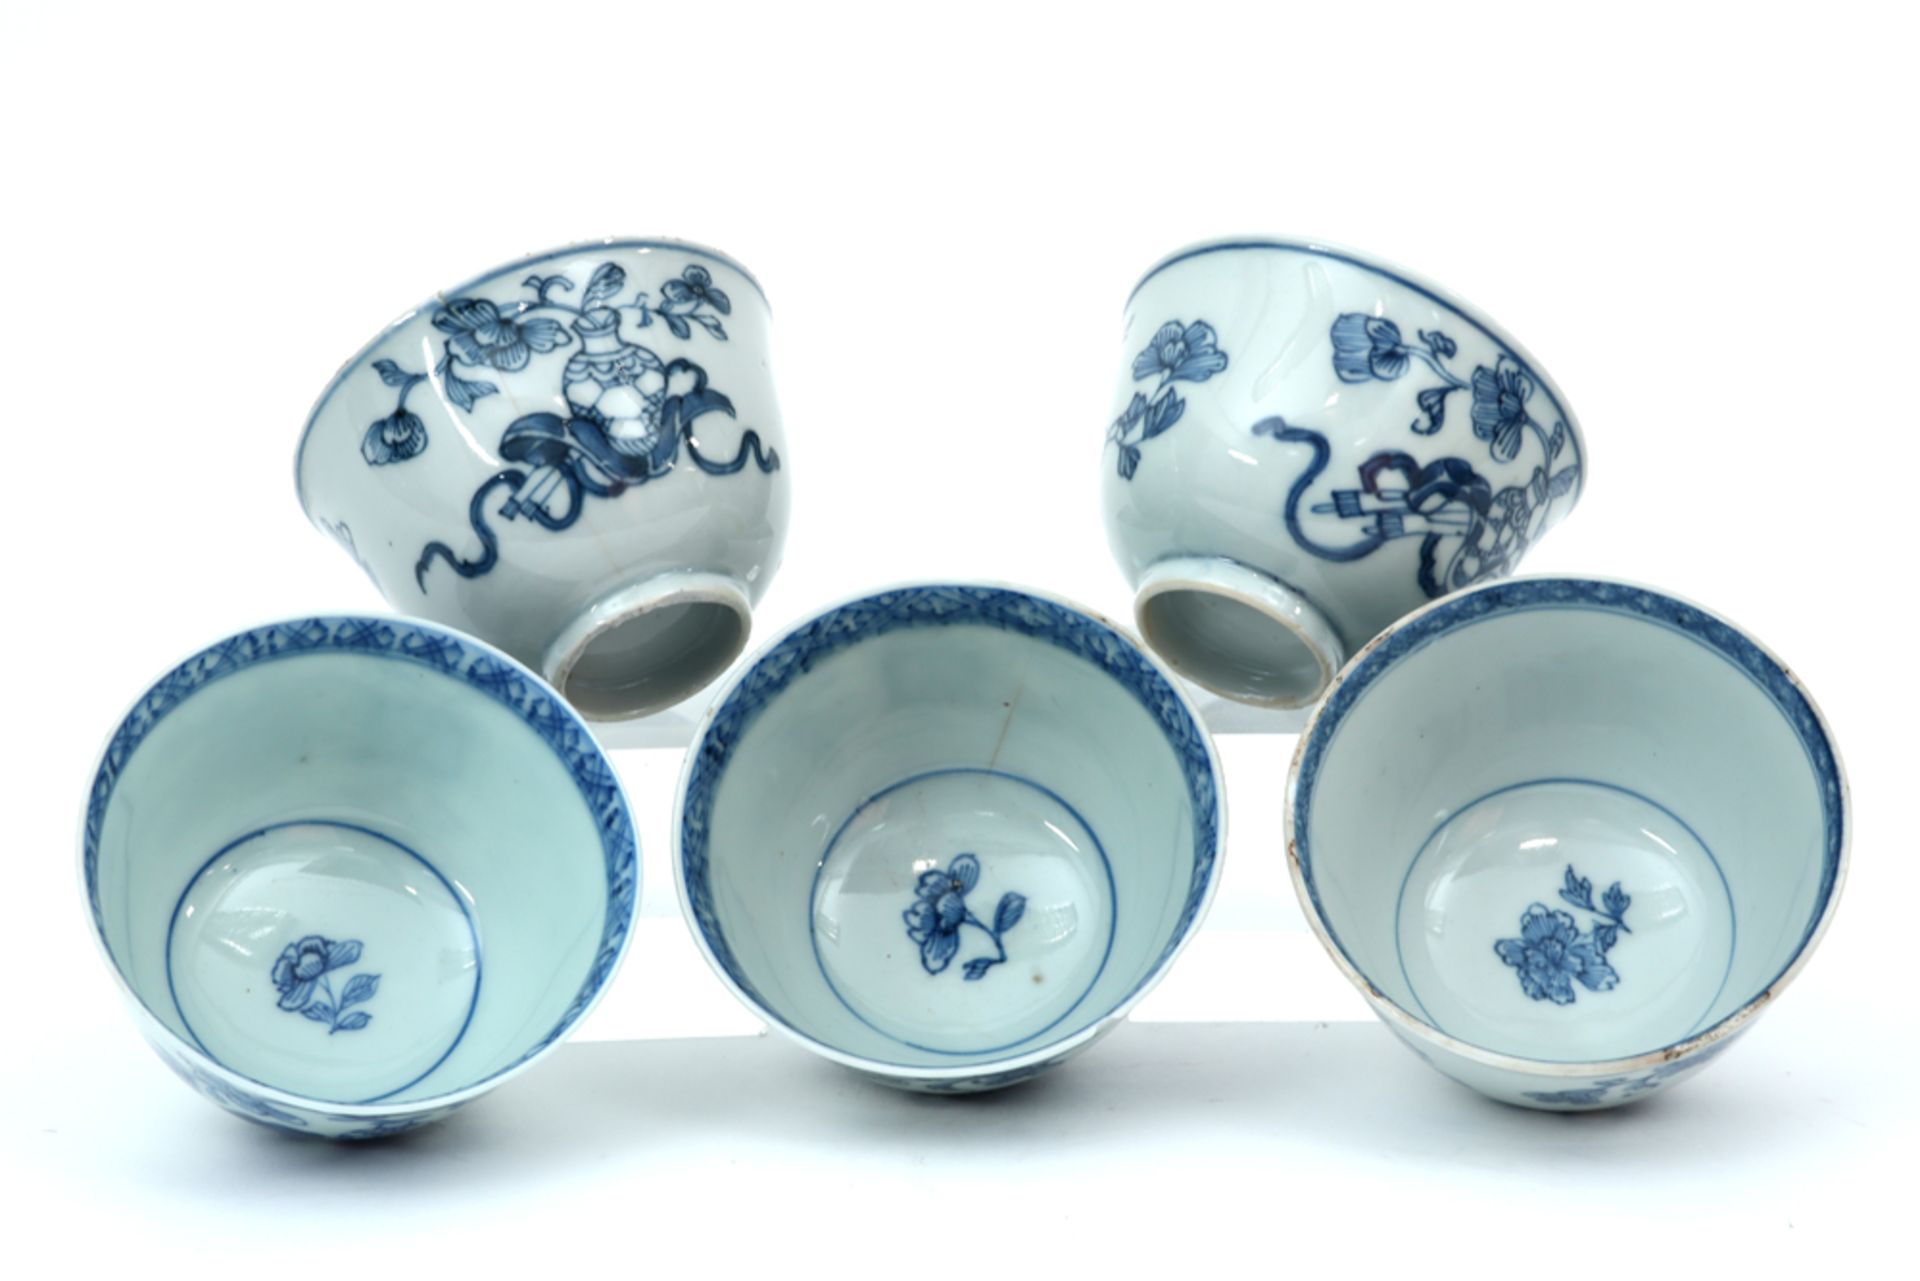 series of five 18th Cent. Chinese tea cups in porcelain with a floral blue-white decor || Reeks - Image 3 of 3